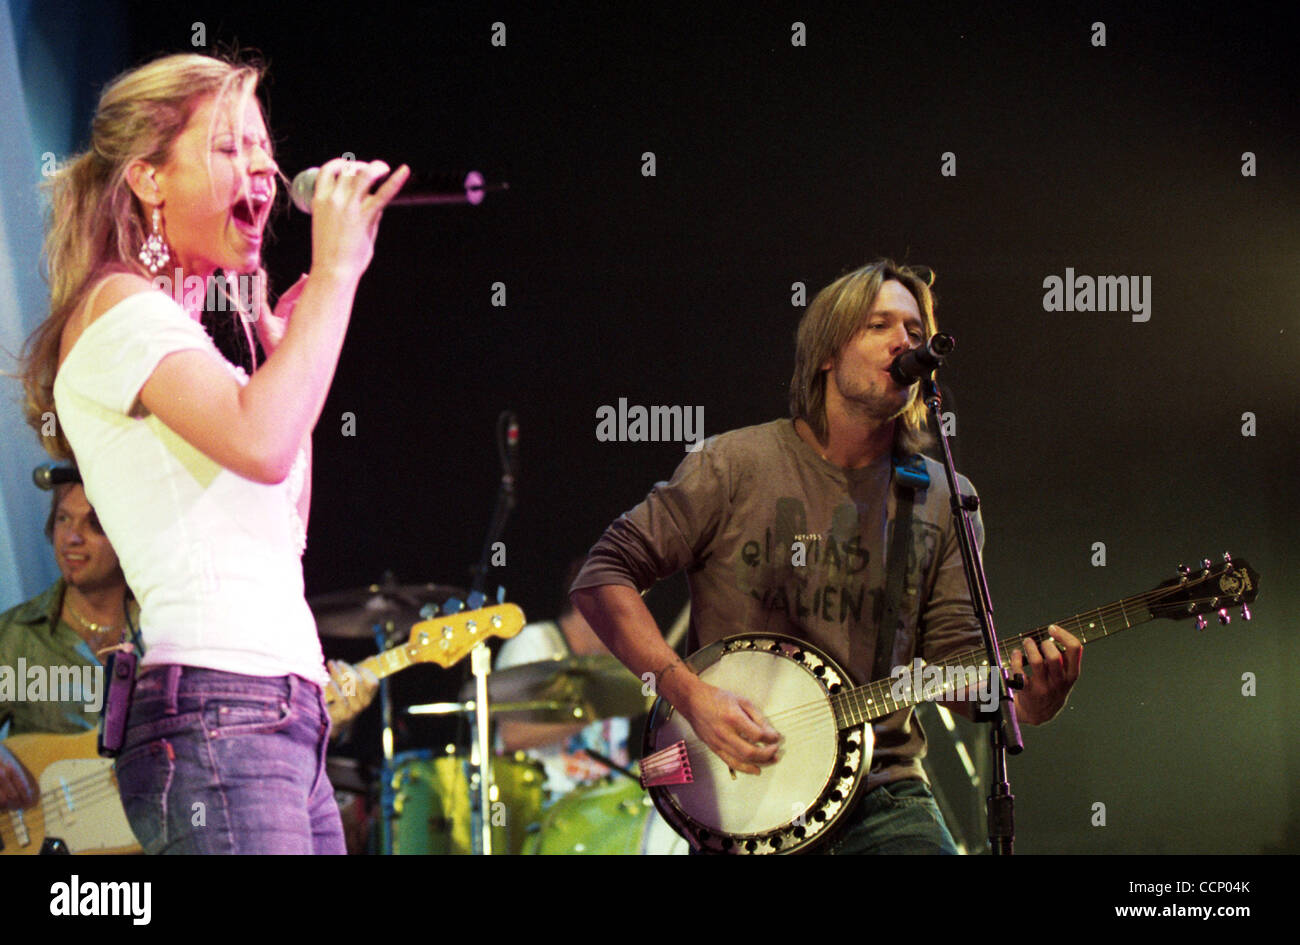 Nov. 27, 2004; Fayetteville, NC, USA; Musician 'KEITH URBAN'  performs  live with singer 'KATRINA ELAM'  at The Crown Arena. Mandatory Credit: Photo by Jason Moore/ZUMA Press. (©) Copyright 2004 by Jason Moore Stock Photo